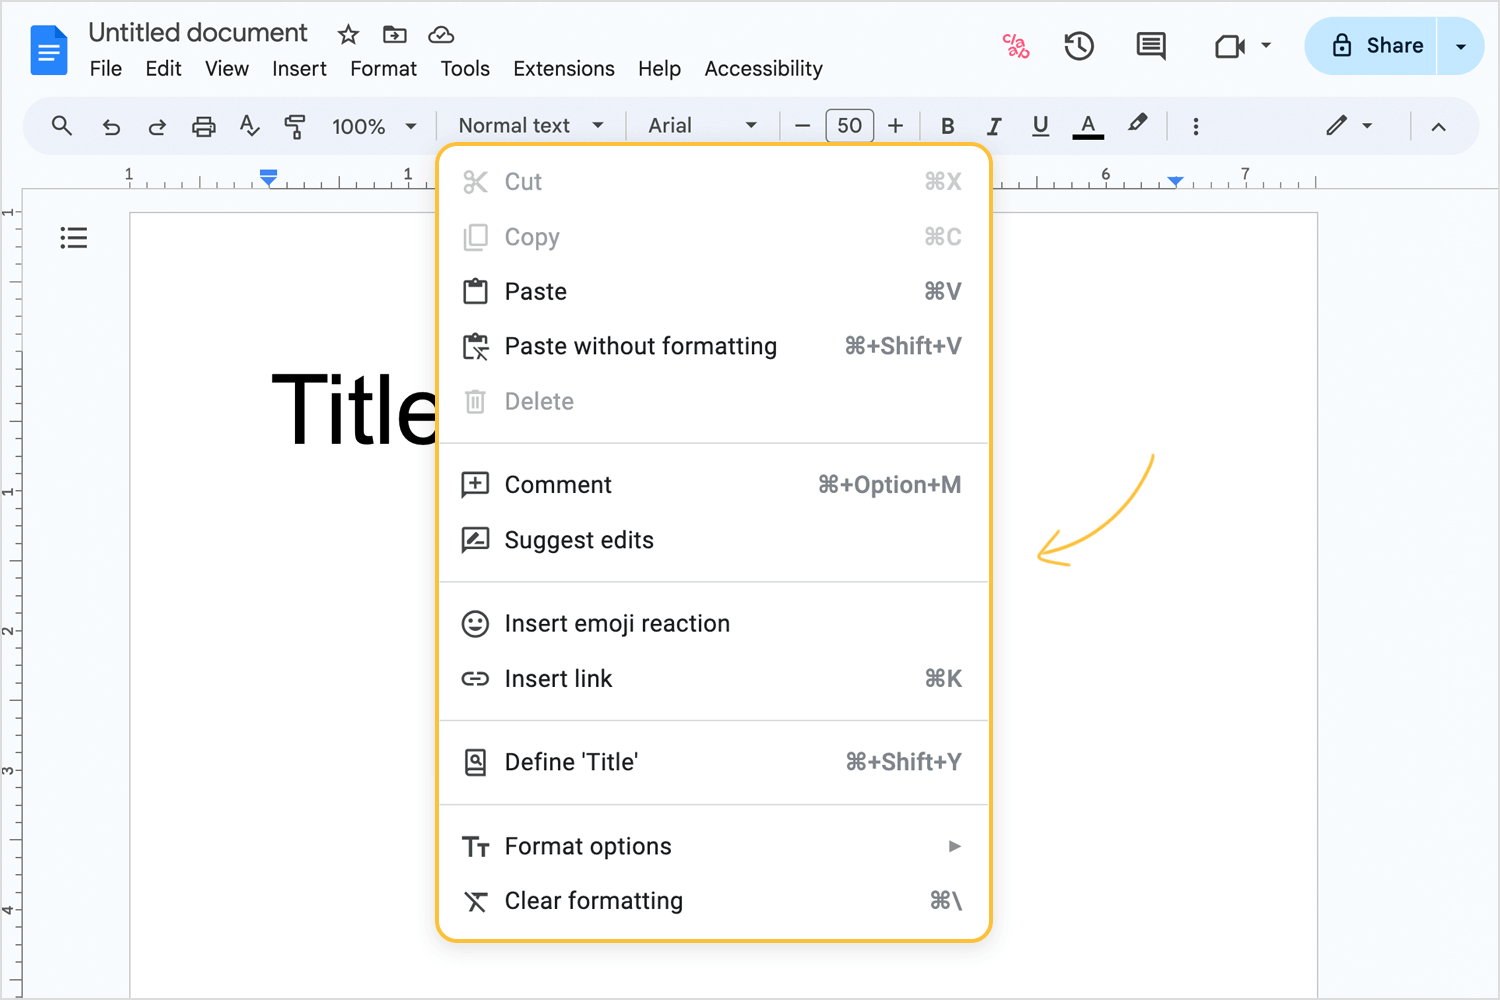 Google Docs interface with a contextual menu showing options like cut, copy, paste, and comment